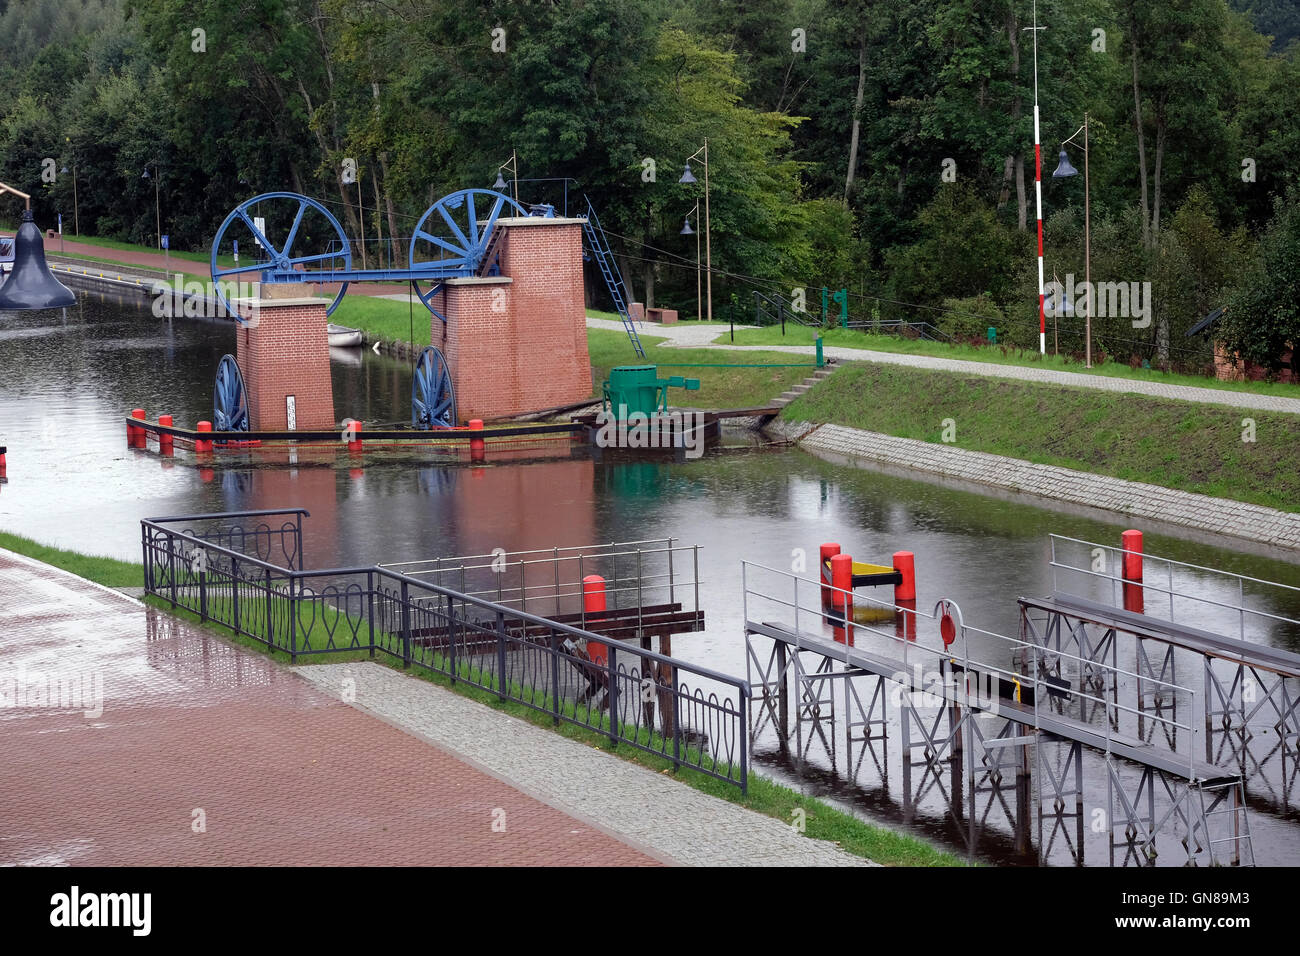 View of cable winch and water lock at Buczyniec in Elbag canal in Warmian-Masurian region, Northern Poland. Built in the 19th century, the Elblag to Ostroda Canal deals with the 99.5m difference in water levels by means of a system of slipways, locks, dams and safety gates. Five slipways carry boats across dry land on rail-mounted trolleys. Stock Photo